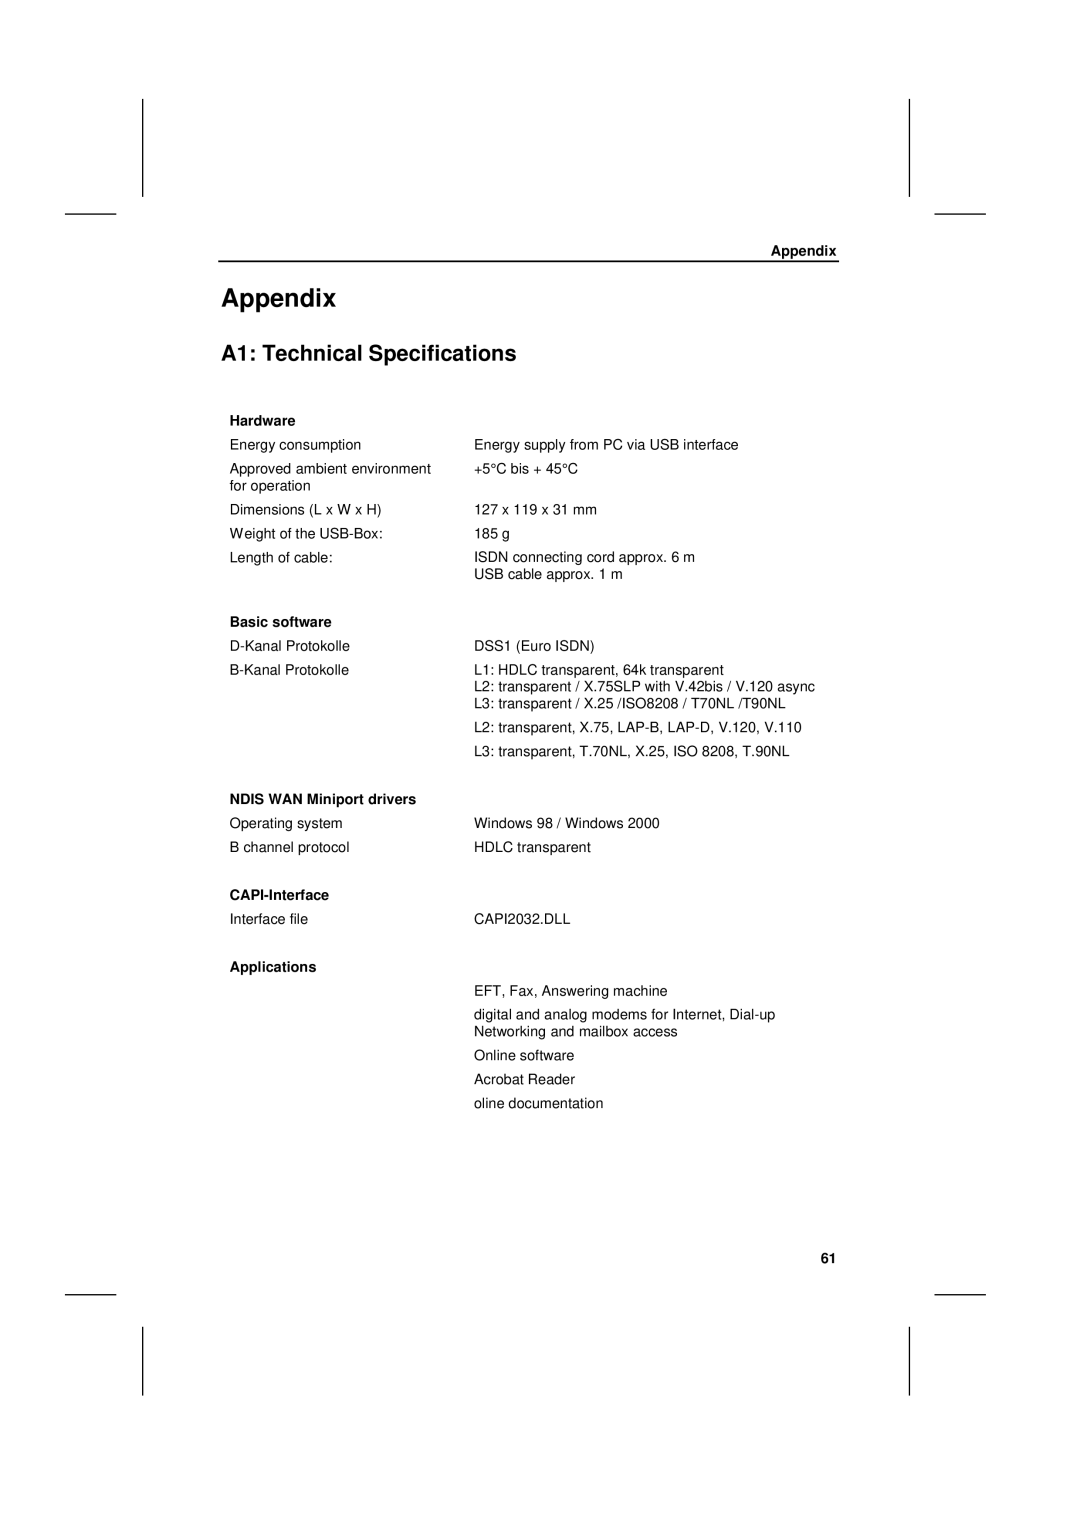 Siemens I-SURF manual Appendix, A1 Technical Specifications 